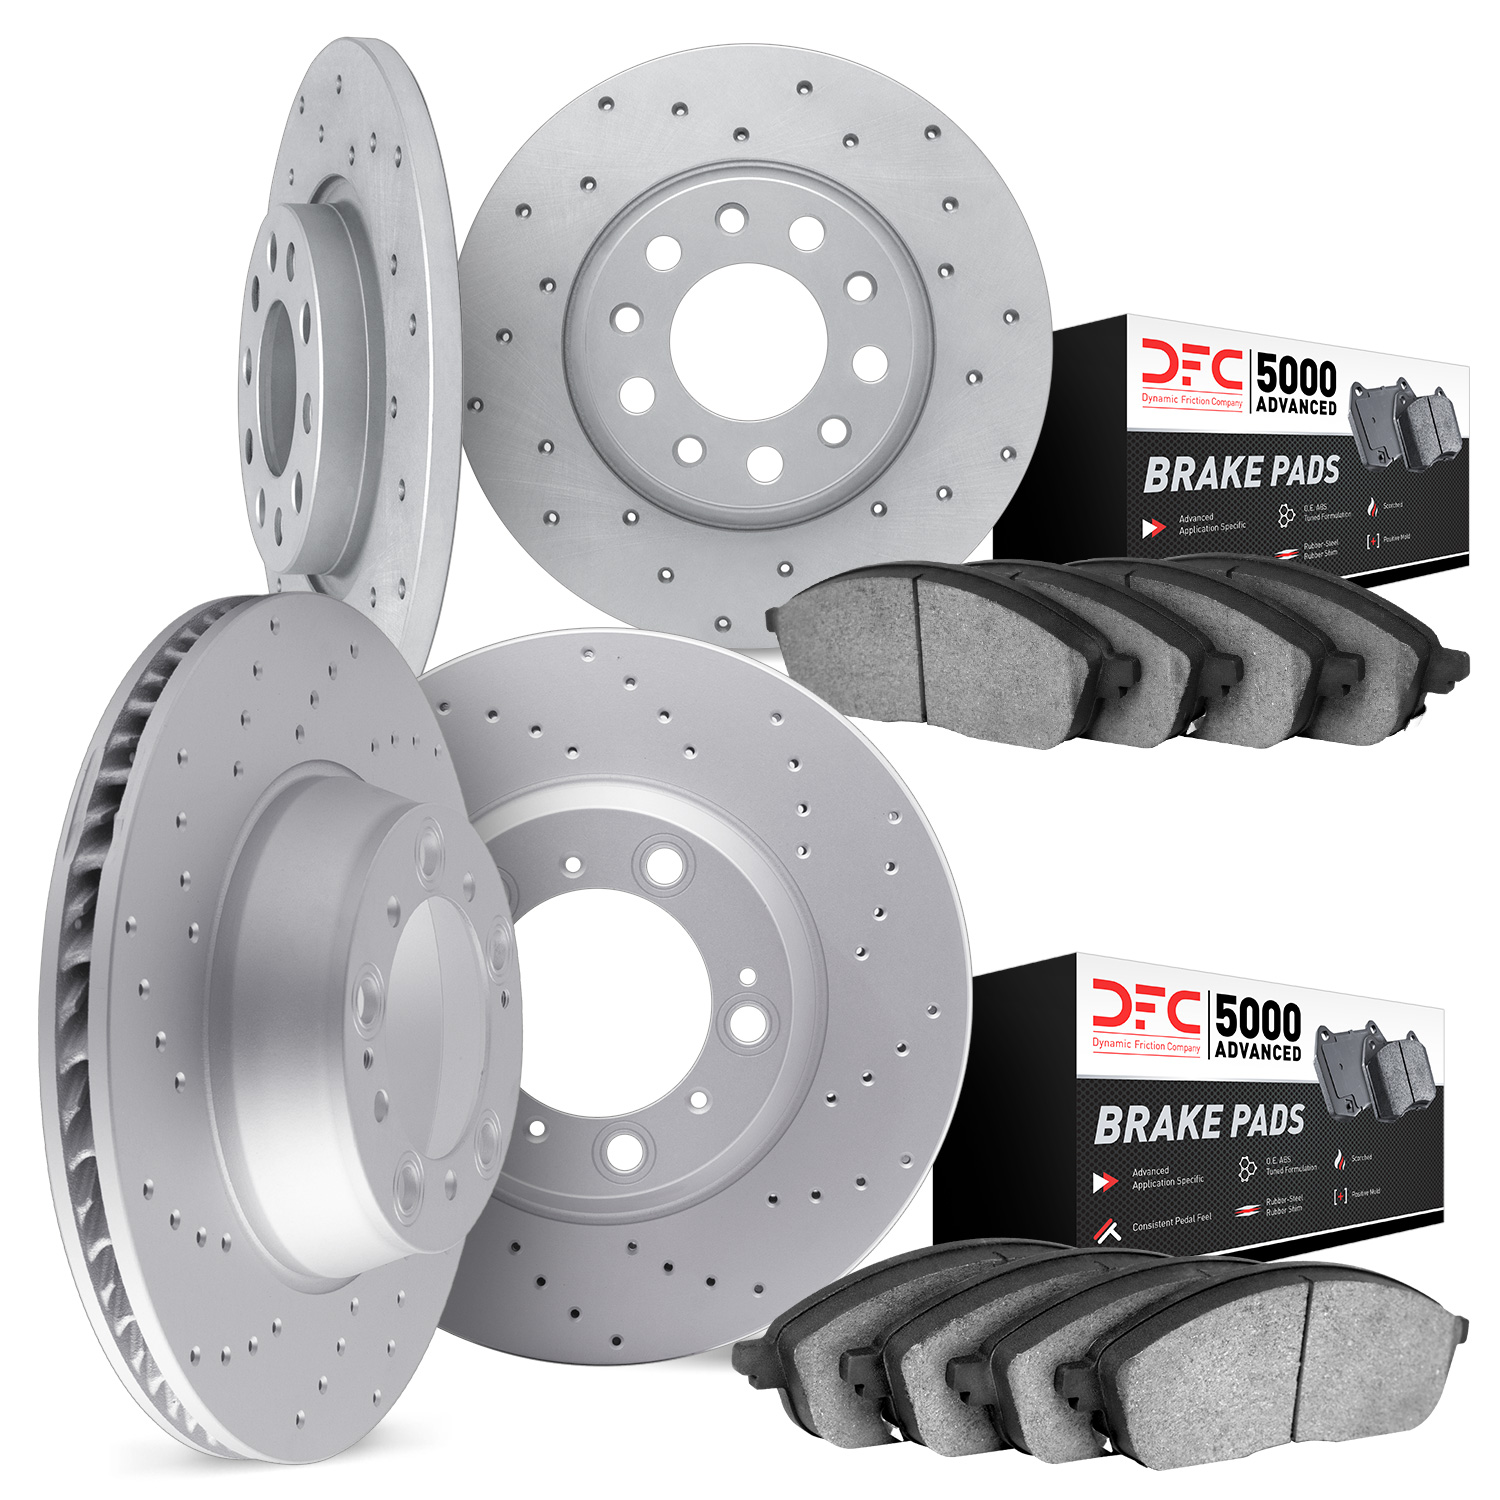 2704-58000 Geoperformance Drilled Brake Rotors with Active Performance Pads Kit, 1999-2003 Acura/Honda, Position: Front and Rear